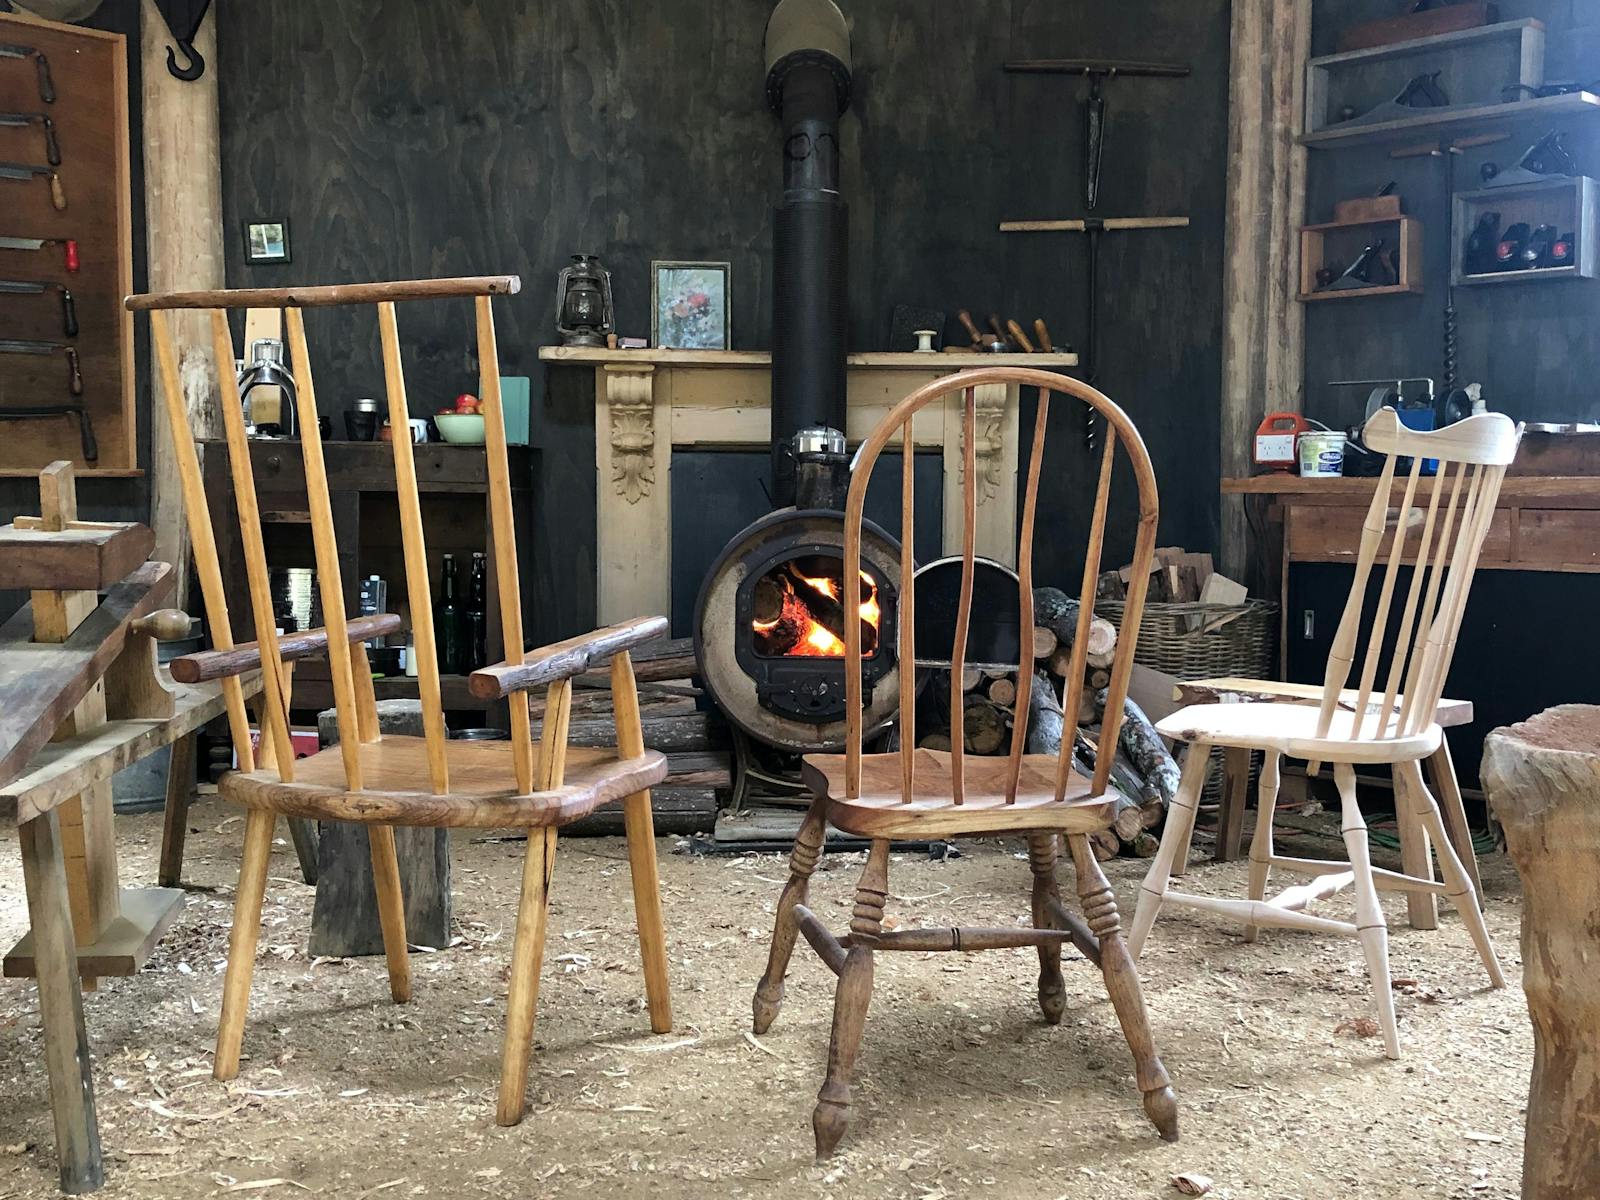 Windsor chairs in the wisdom through wood workshop